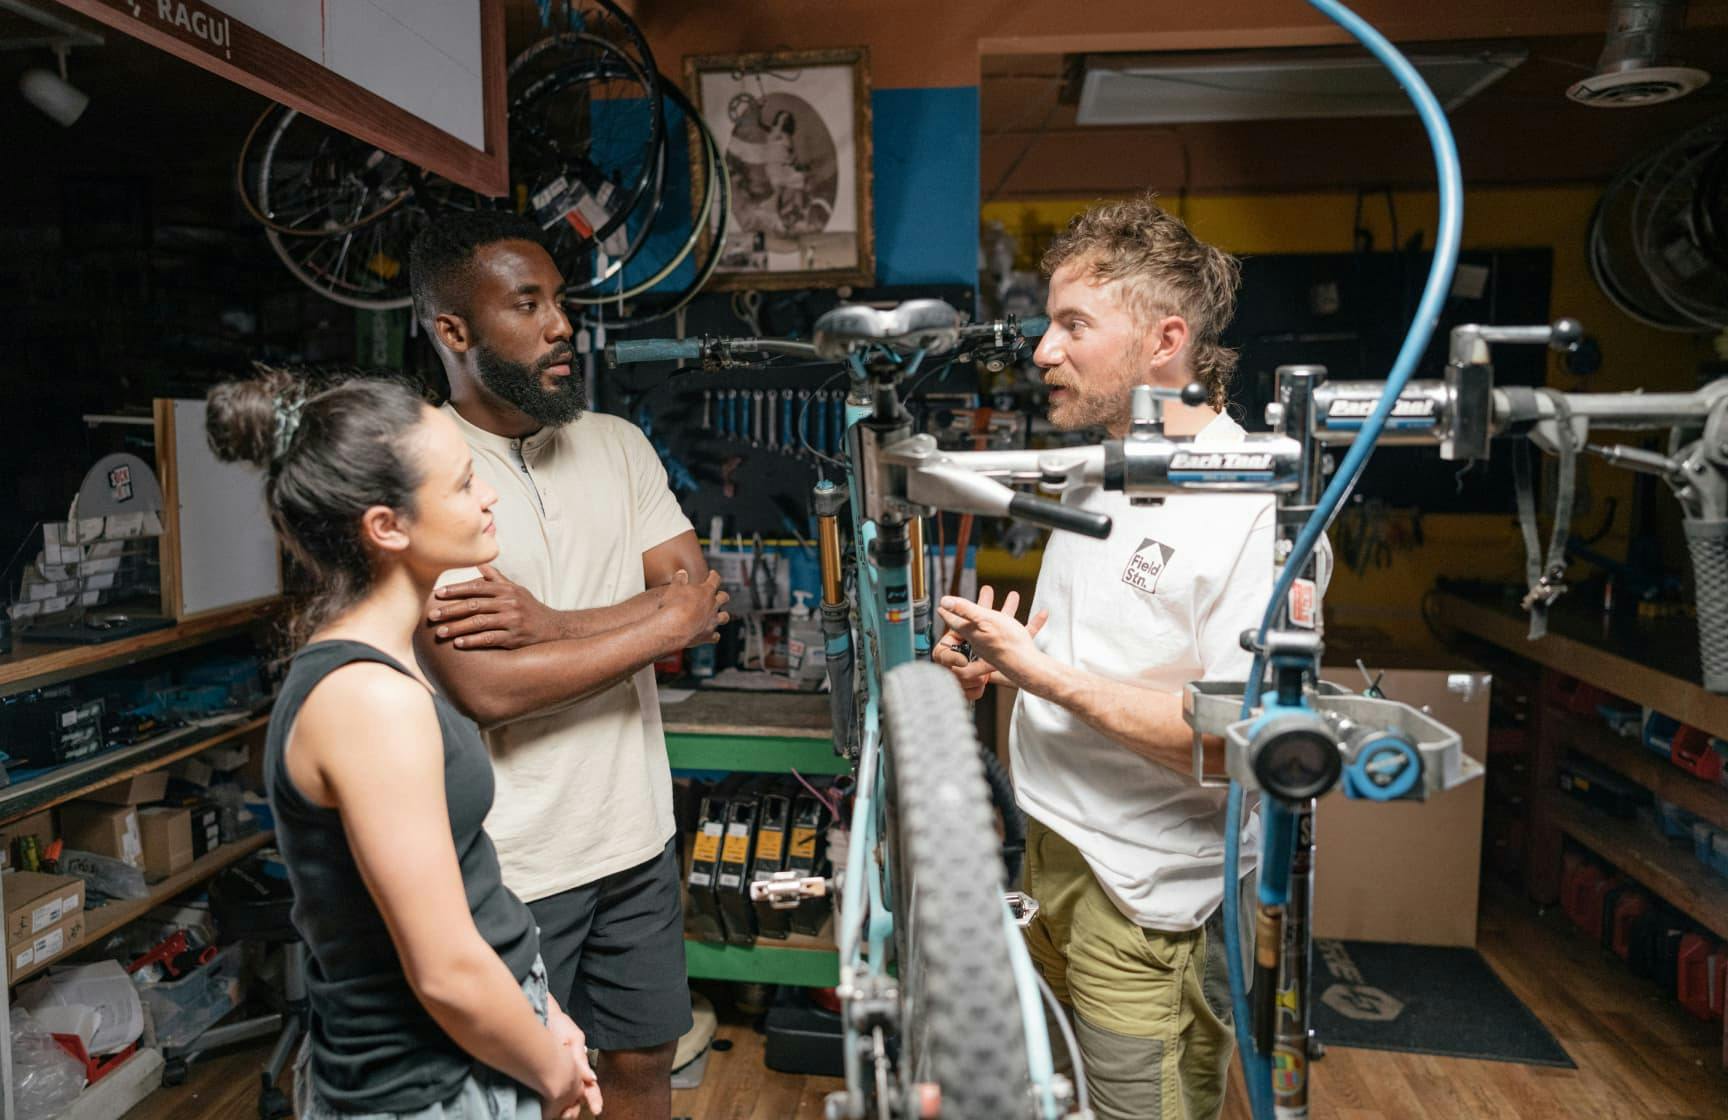 Man and woman in bike shop listening to shopkeeper talk about a bike